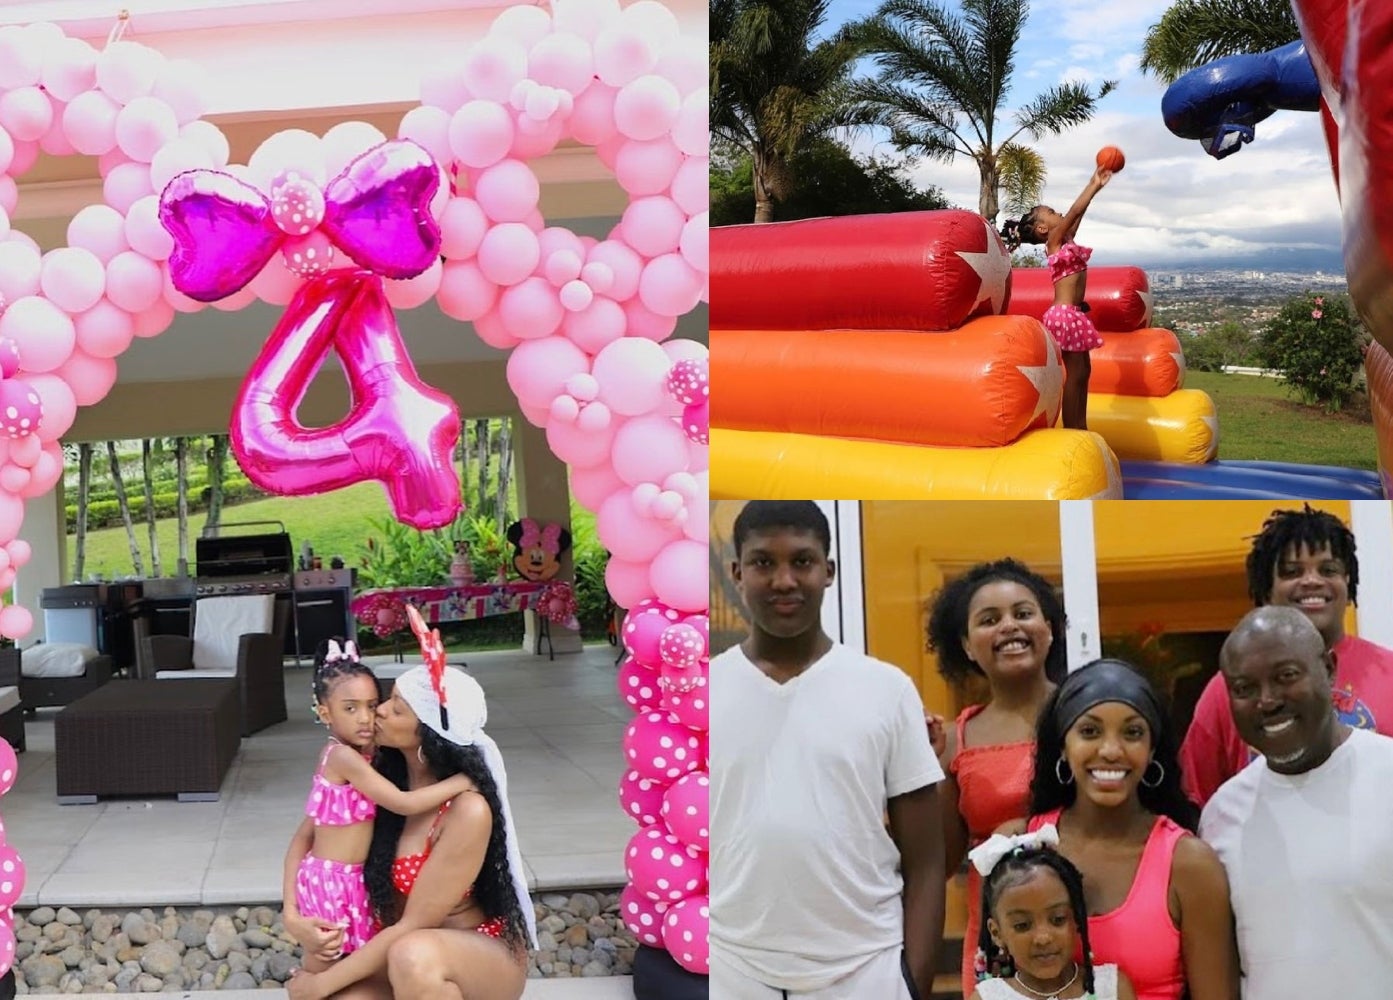 Porsha Williams And Her Blended Family Celebrated Pilar’s 4th Birthday With A Getaway To Costa Rica